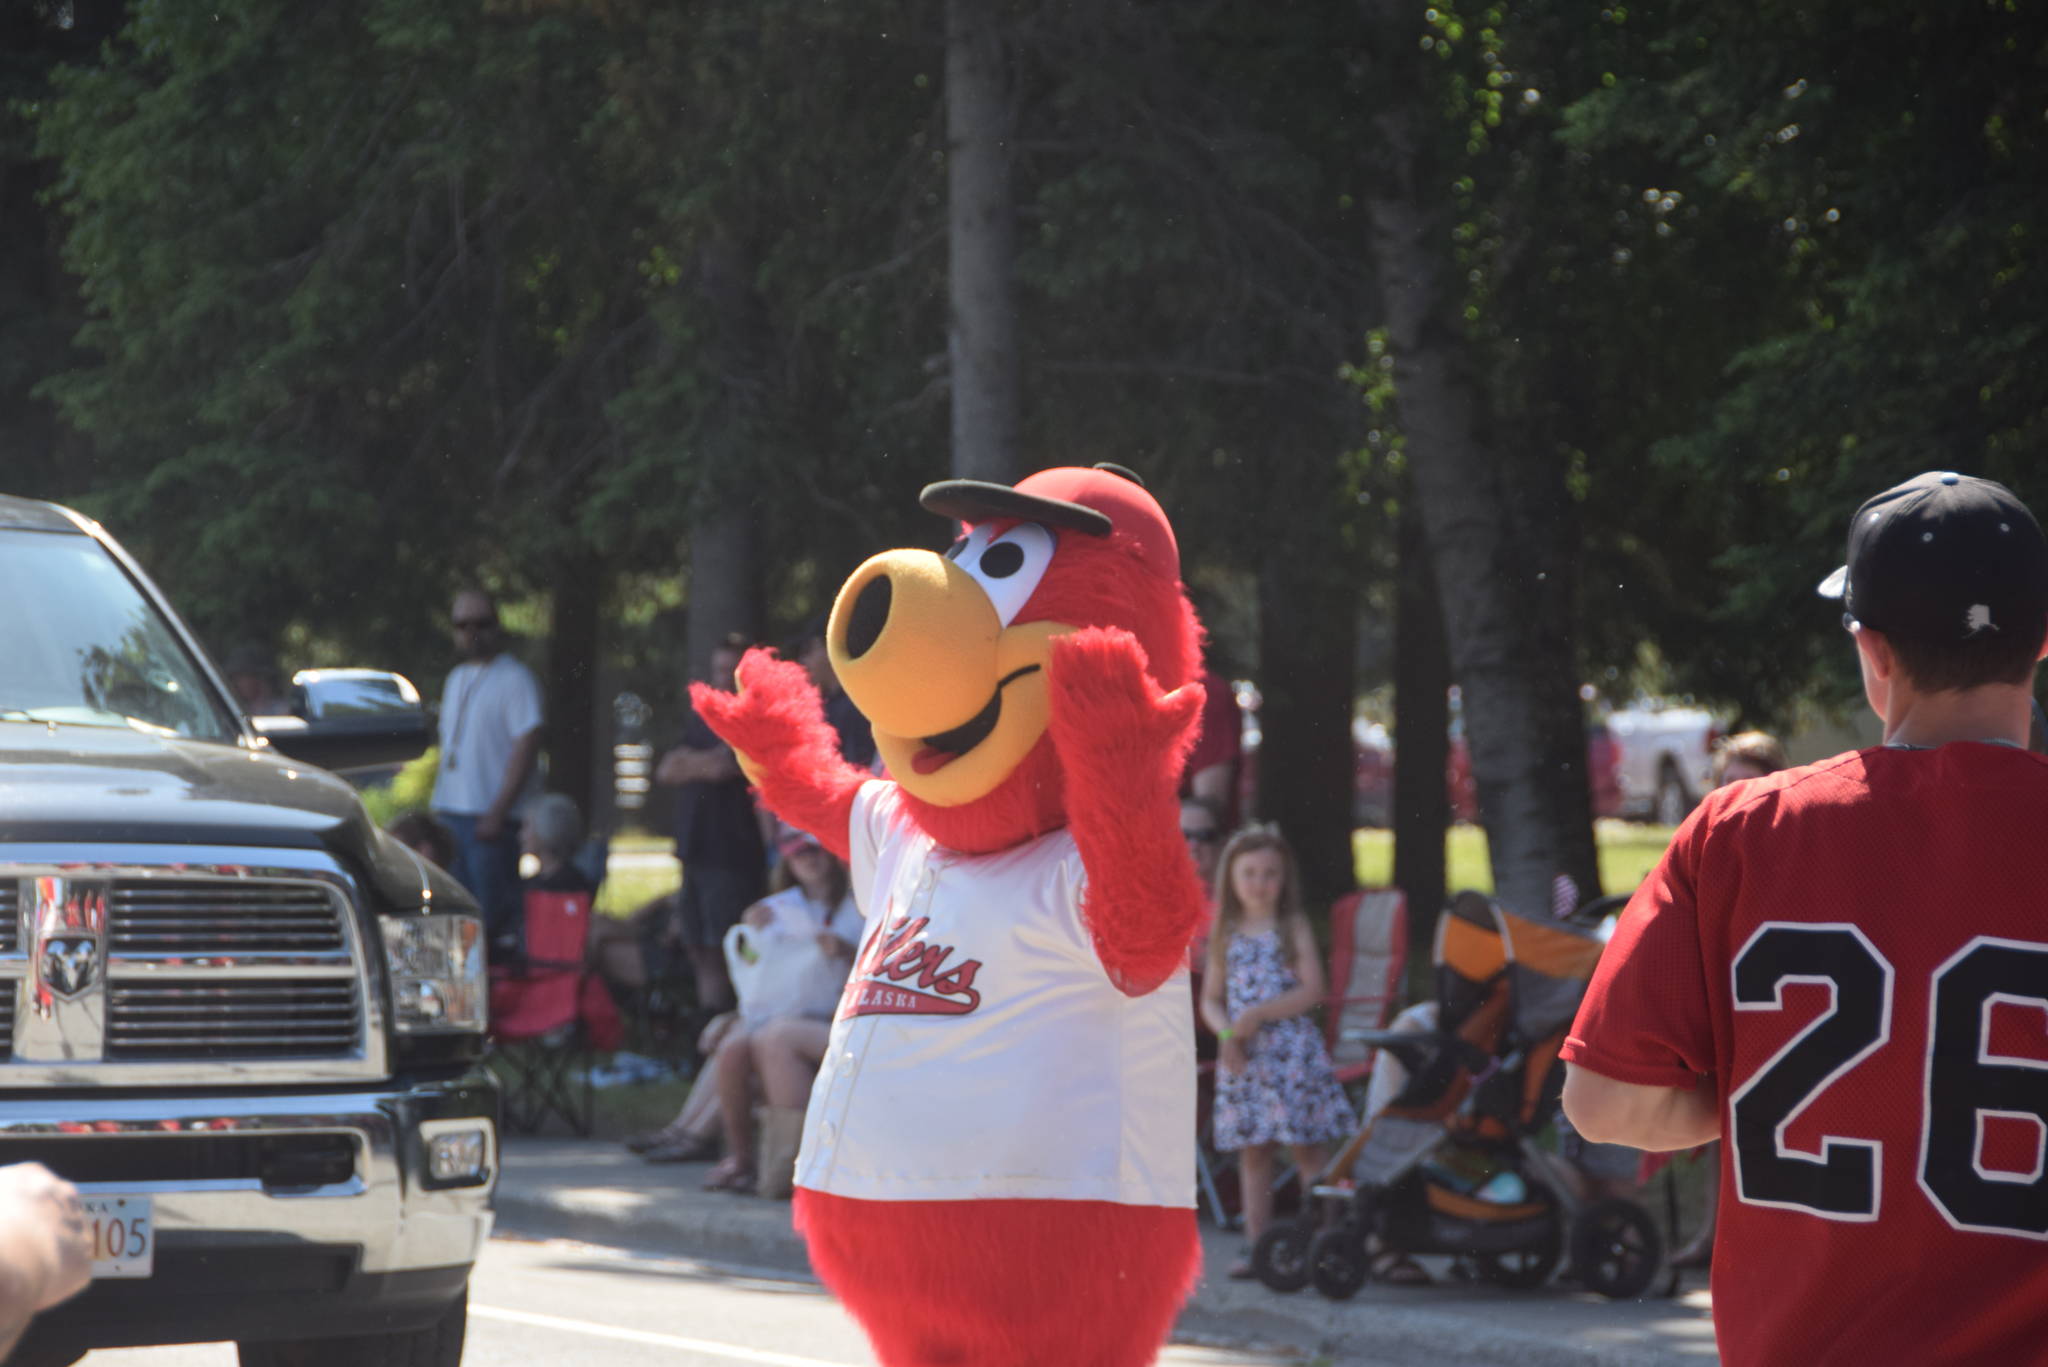 Scoop the Oilers mascot helps the police direct traffic during the 2019 July 4th parade in Kenai. The city hit an all-time high of 89 degrees. (Photo by Brian Mazurek/Peninsula Clarion)